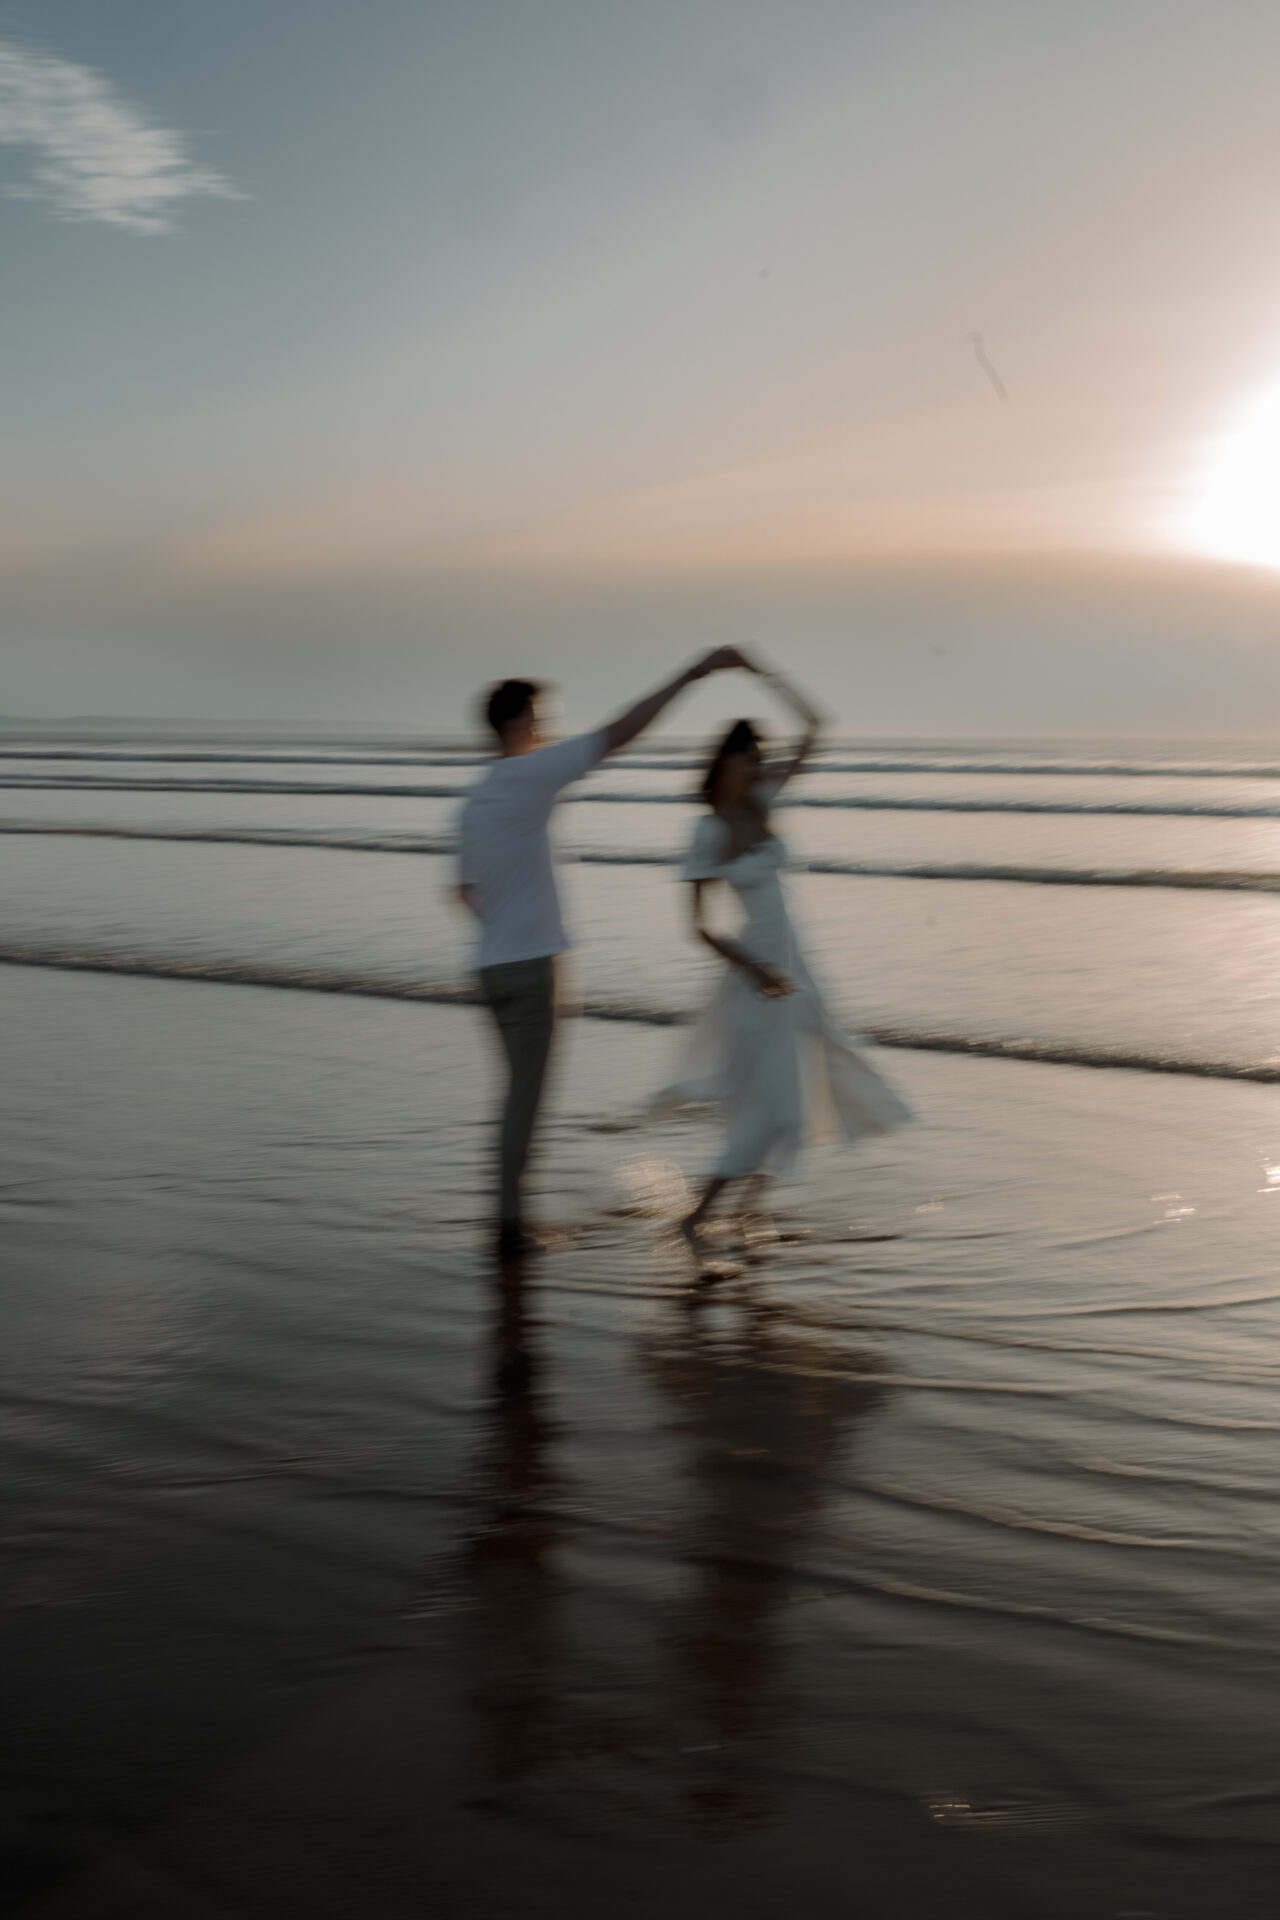 A FREE magic mirror transforms a newlywed couple's dance on the beach at sunset into an enchanting GIF booth experience.